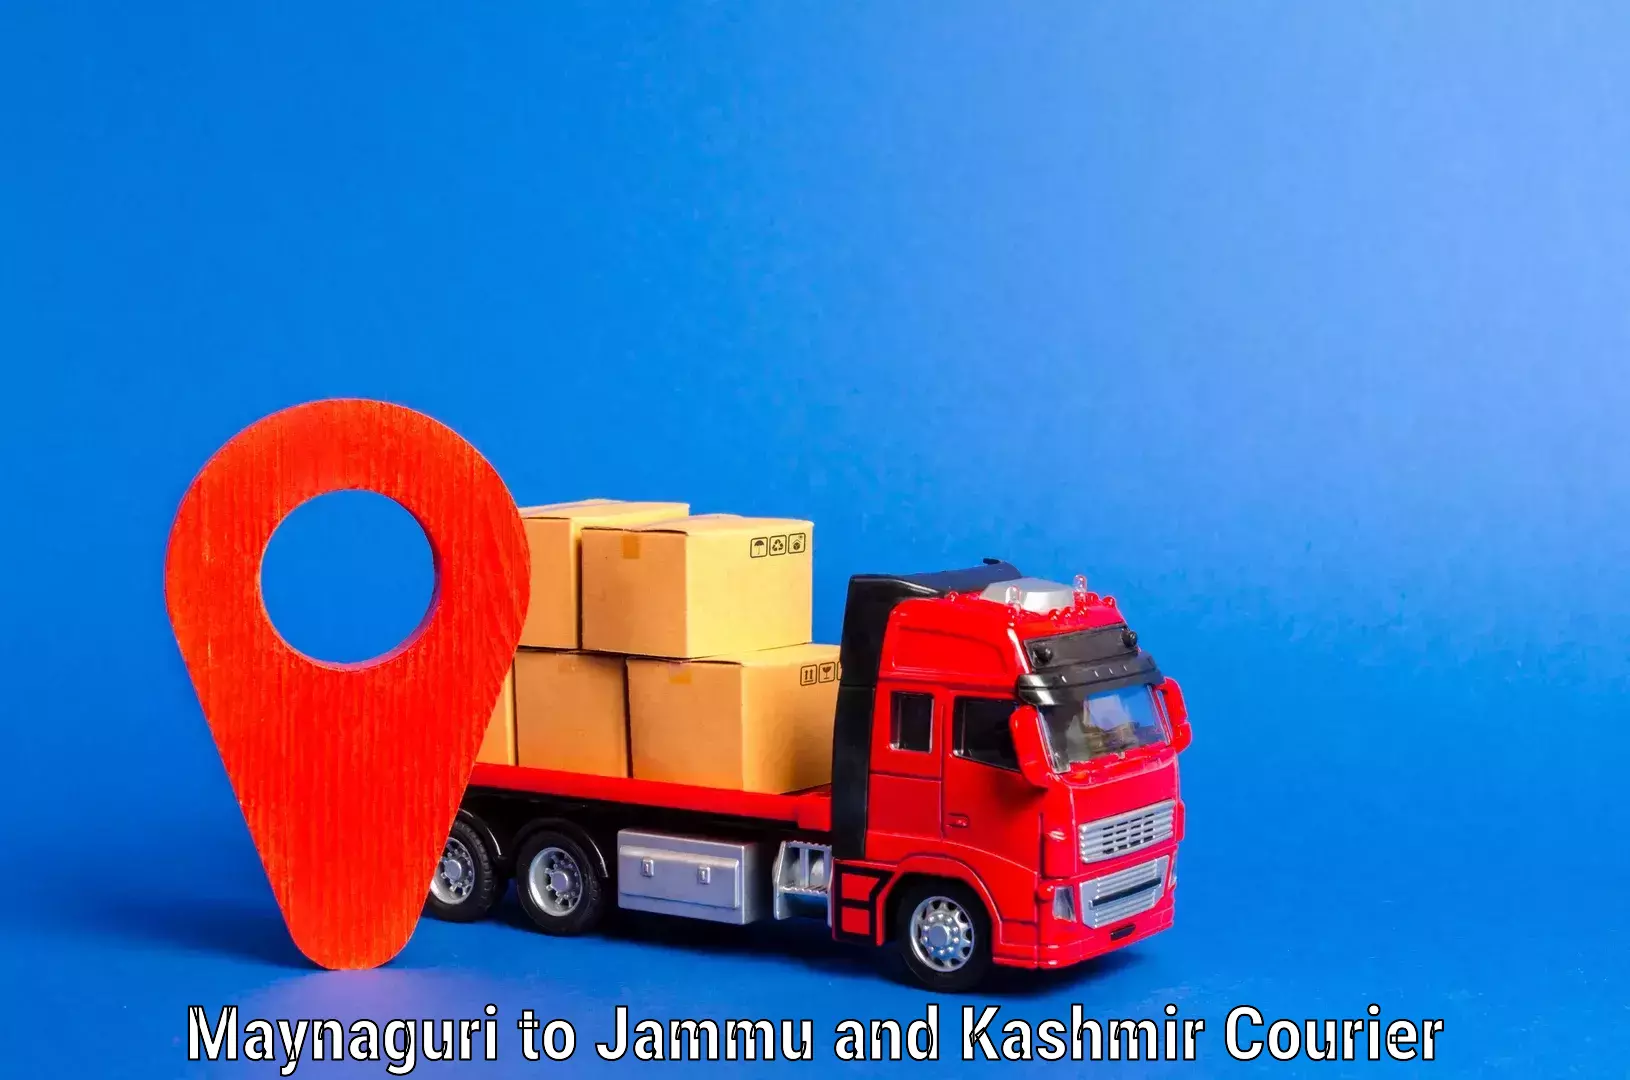 Home moving specialists Maynaguri to Jammu and Kashmir